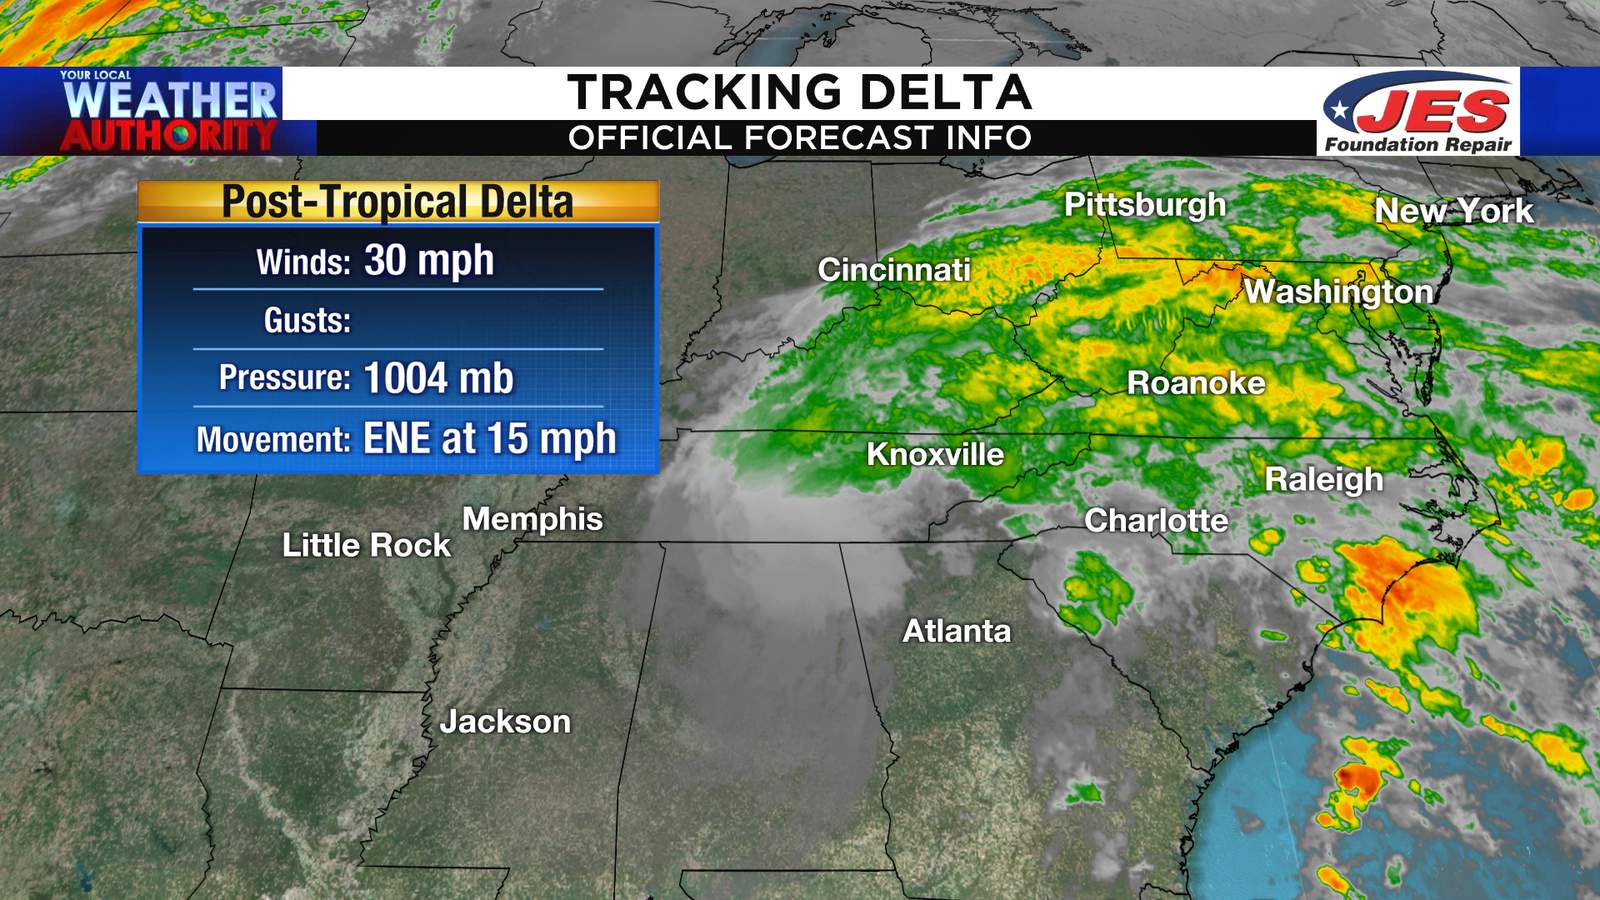 Delta weakens to a post-tropical cyclone